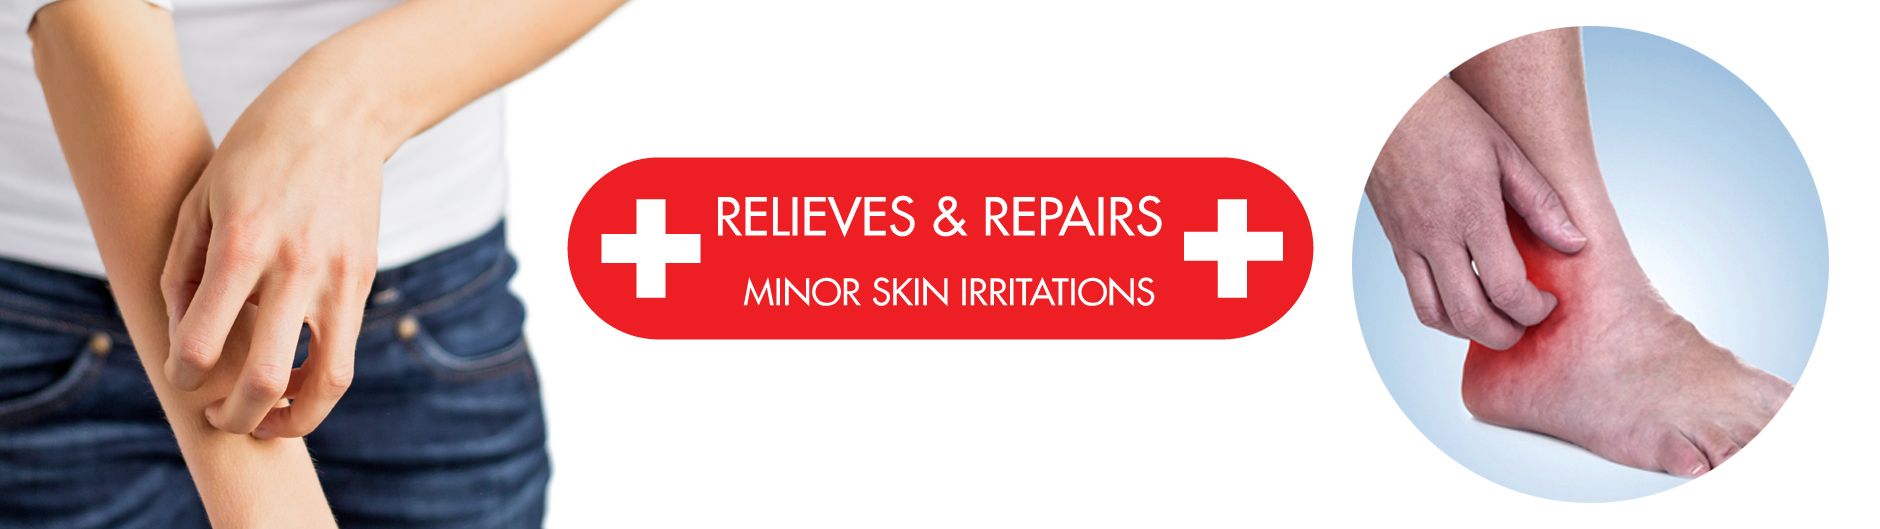 Relieves and repairs